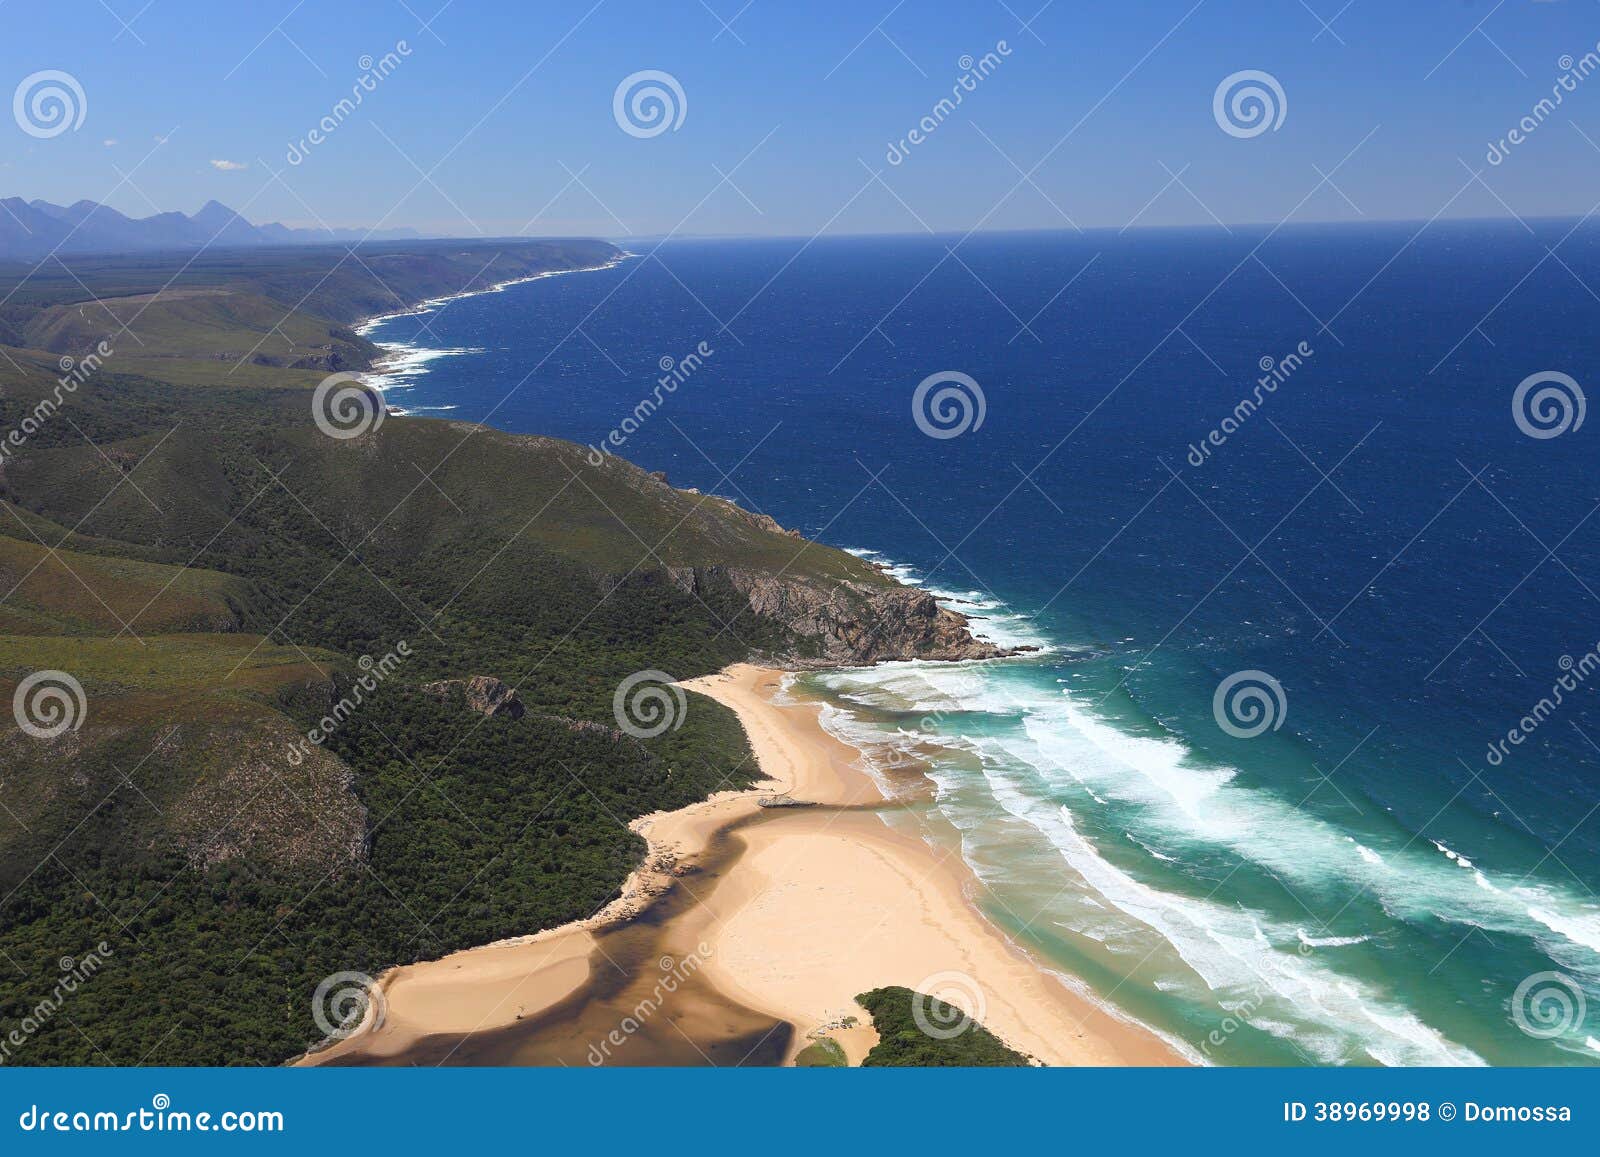 aerial shot of natures valley in the garden route